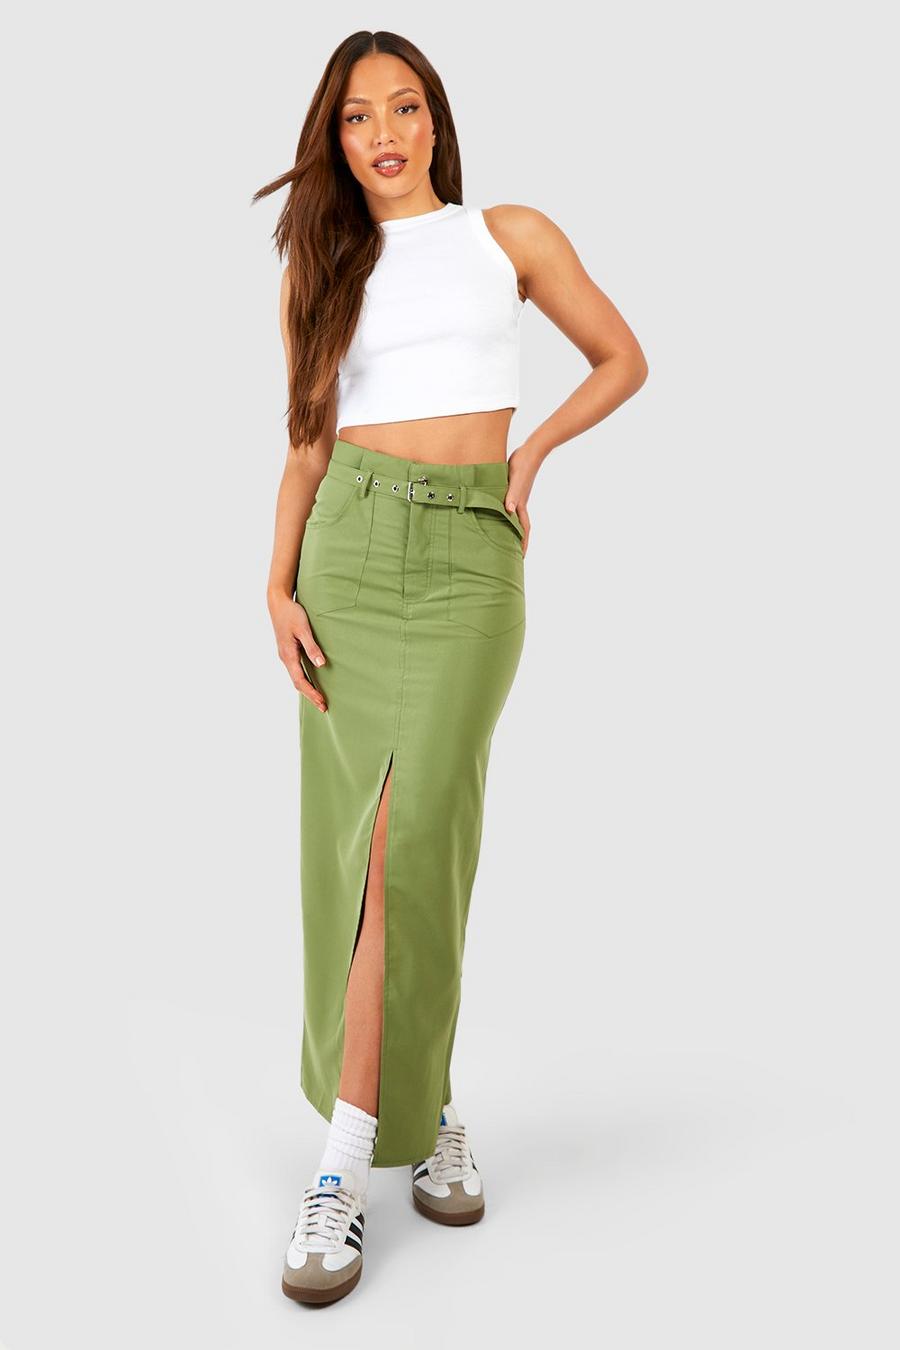 Khaki Tall Woven Eyelet Belted Maxi Skirt  image number 1